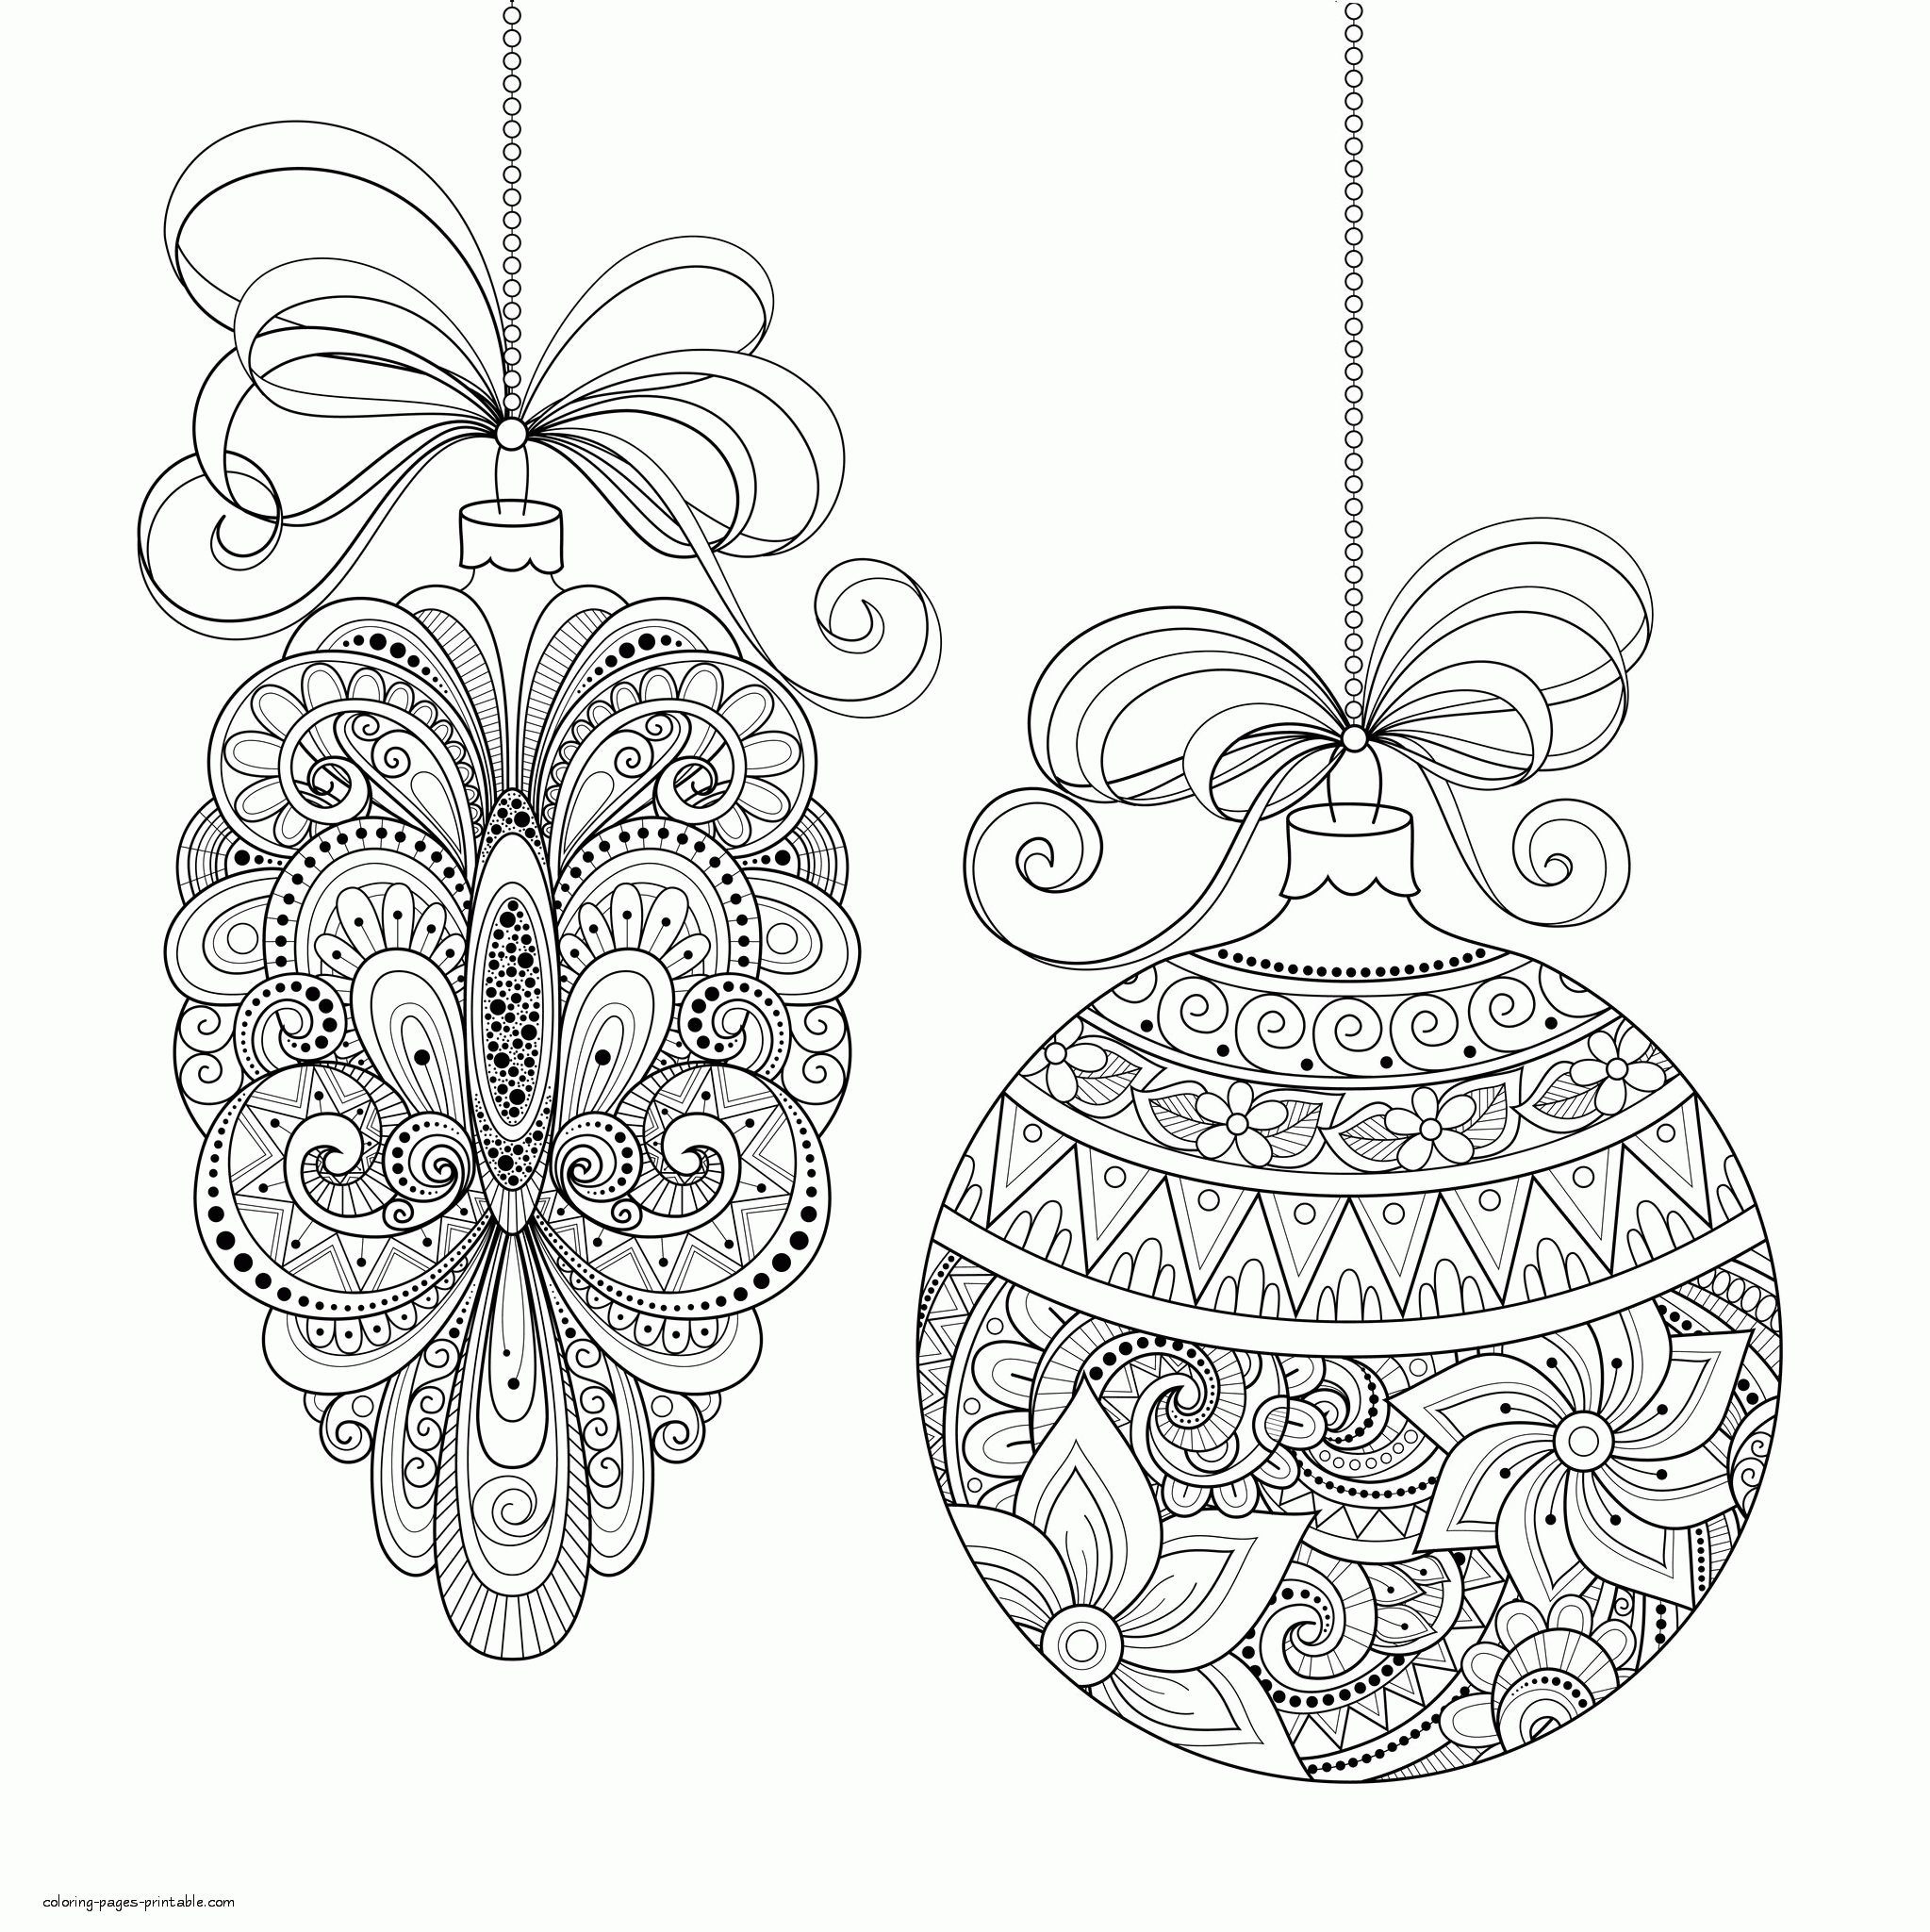 Download Free Adult Christmas Coloring Pages || COLORING-PAGES-PRINTABLE.COM